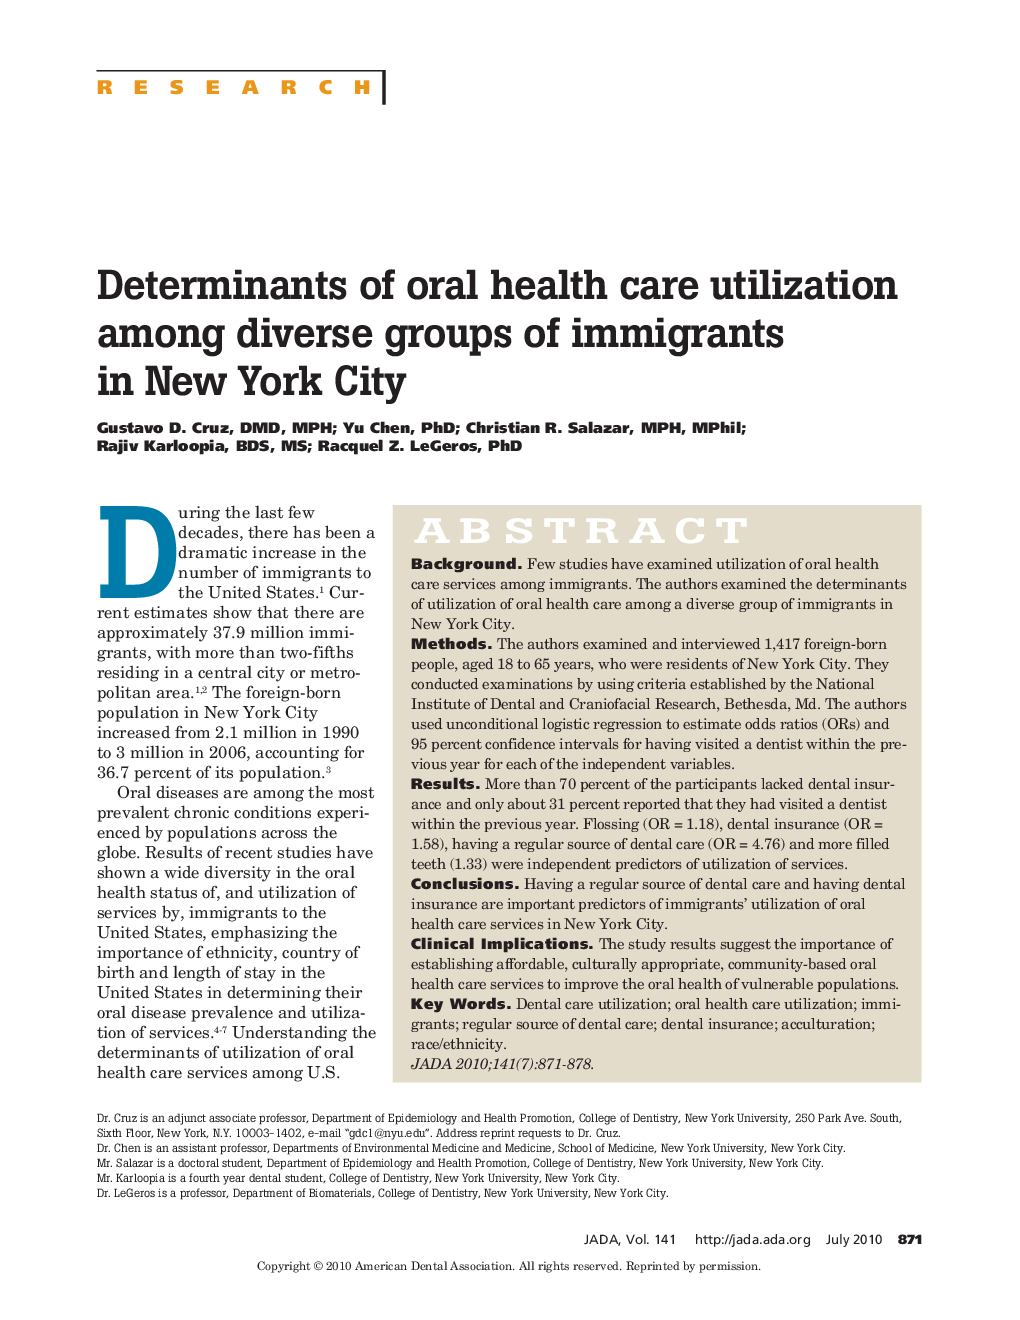 Determinants of oral health care utilization among diverse groups of immigrants in New York City